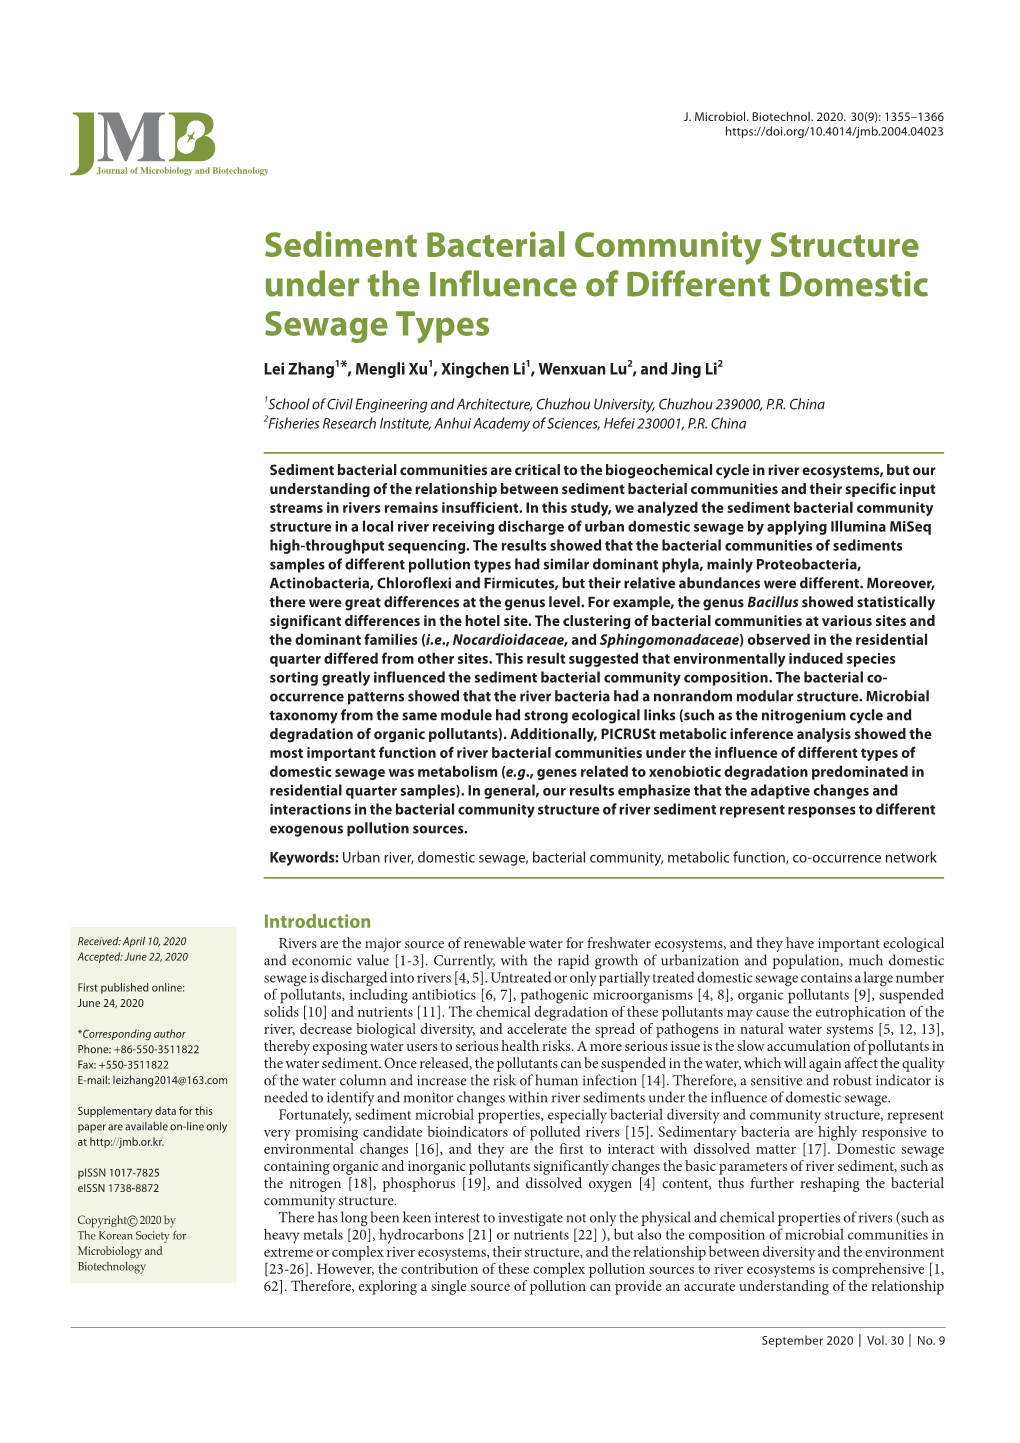 Sediment Bacterial Community Structure Under the Influence of Different Domestic Sewage Types